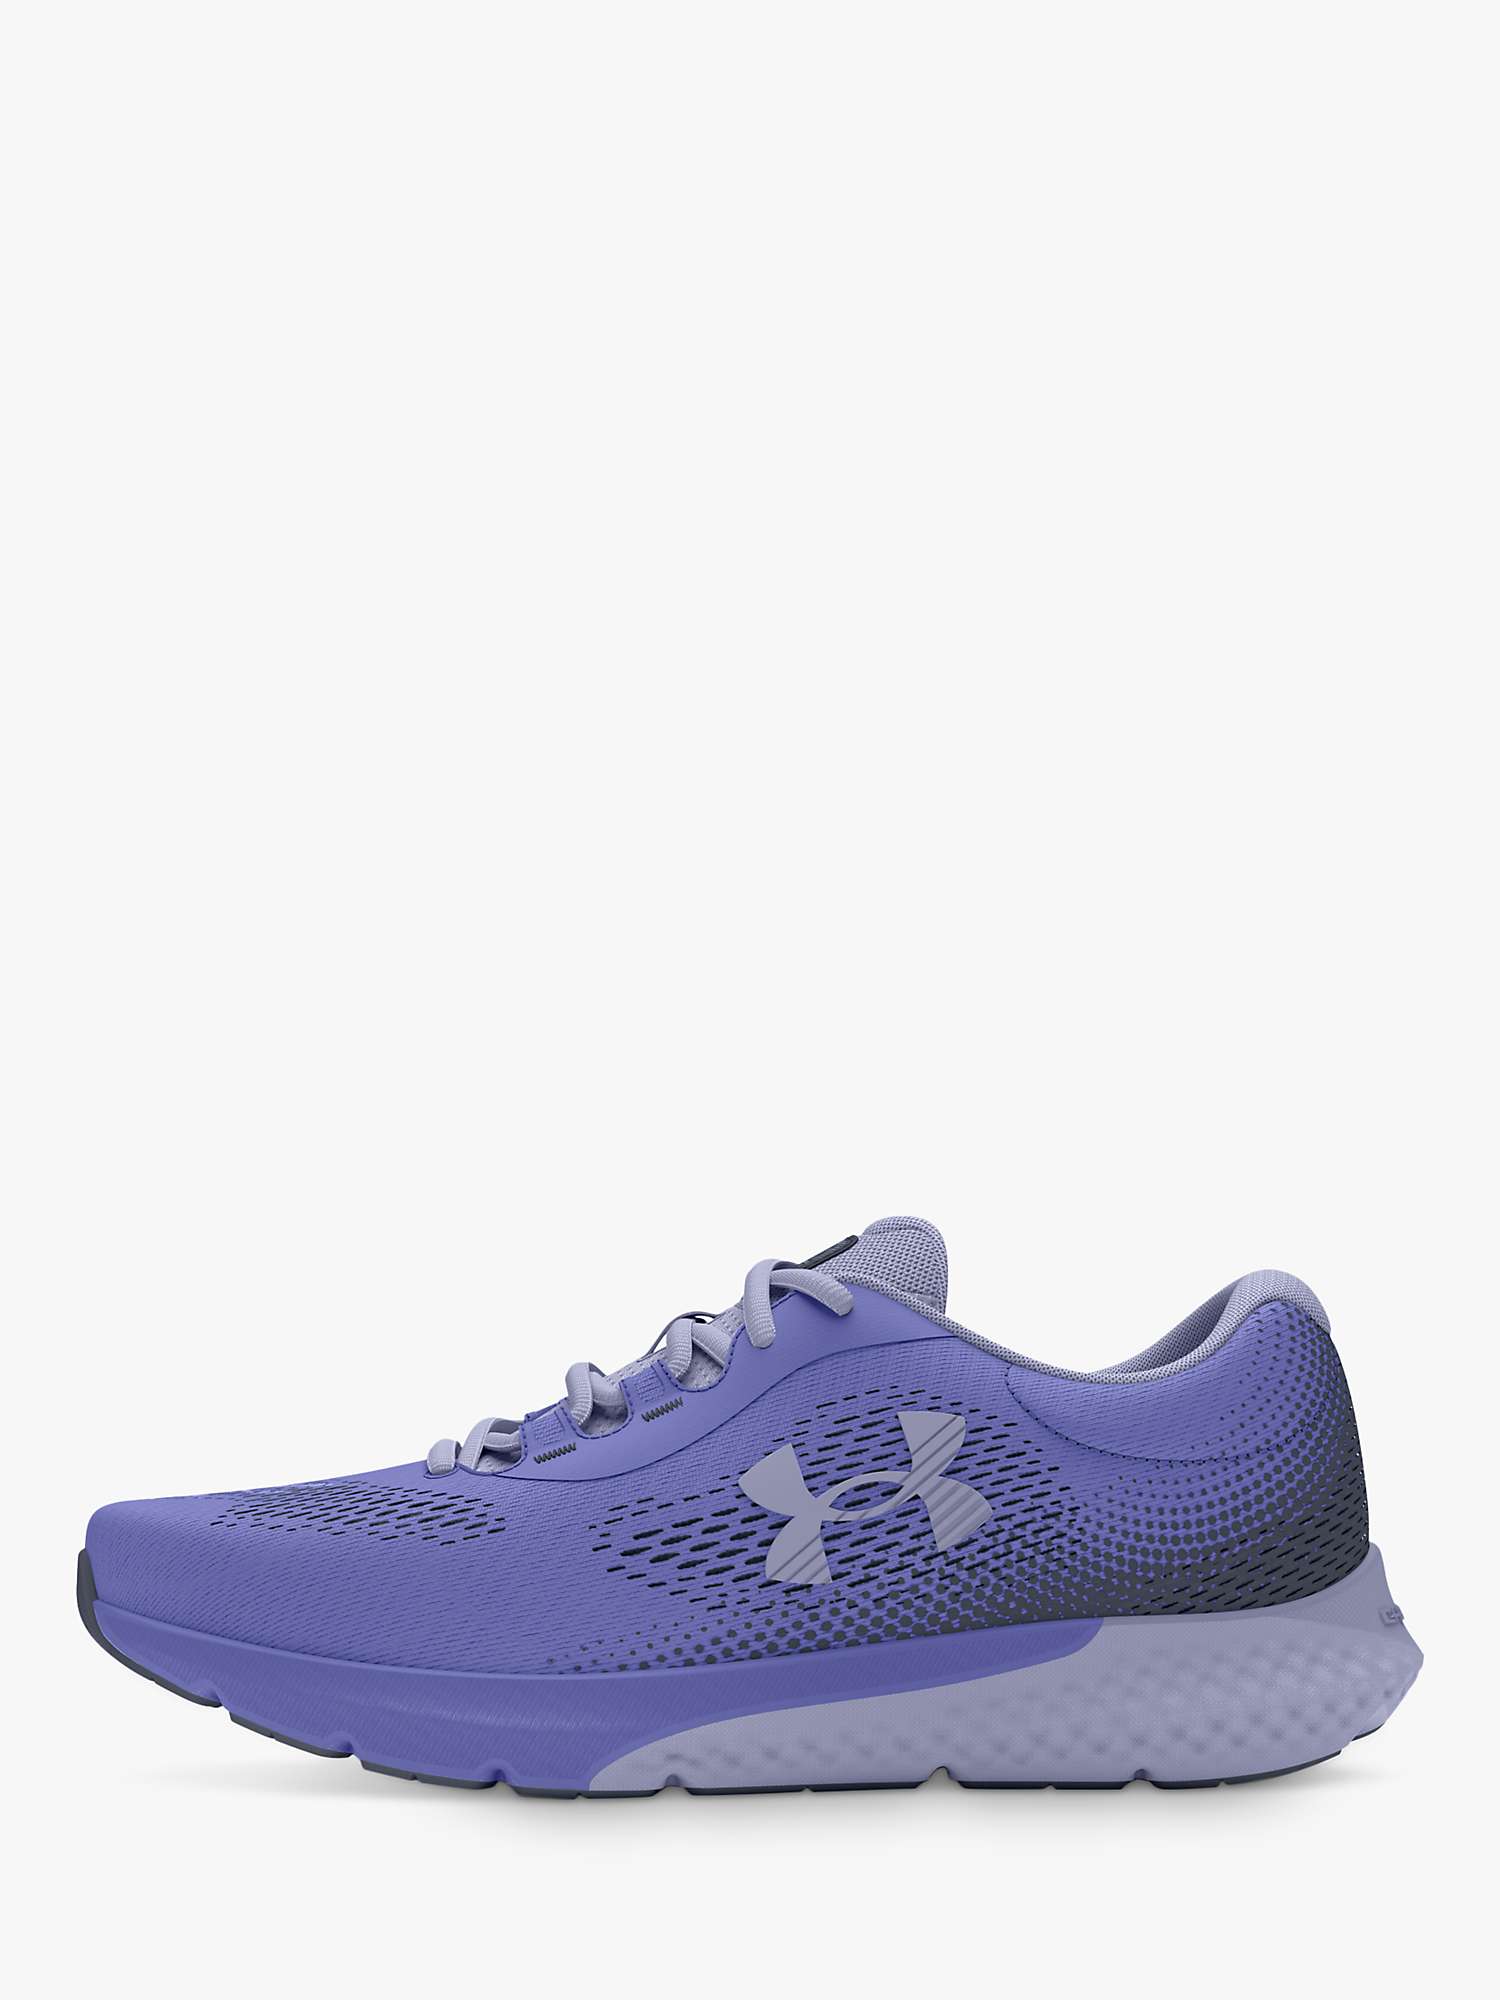 Buy Under Armour Rogue 4 Women's Running Shoes Online at johnlewis.com